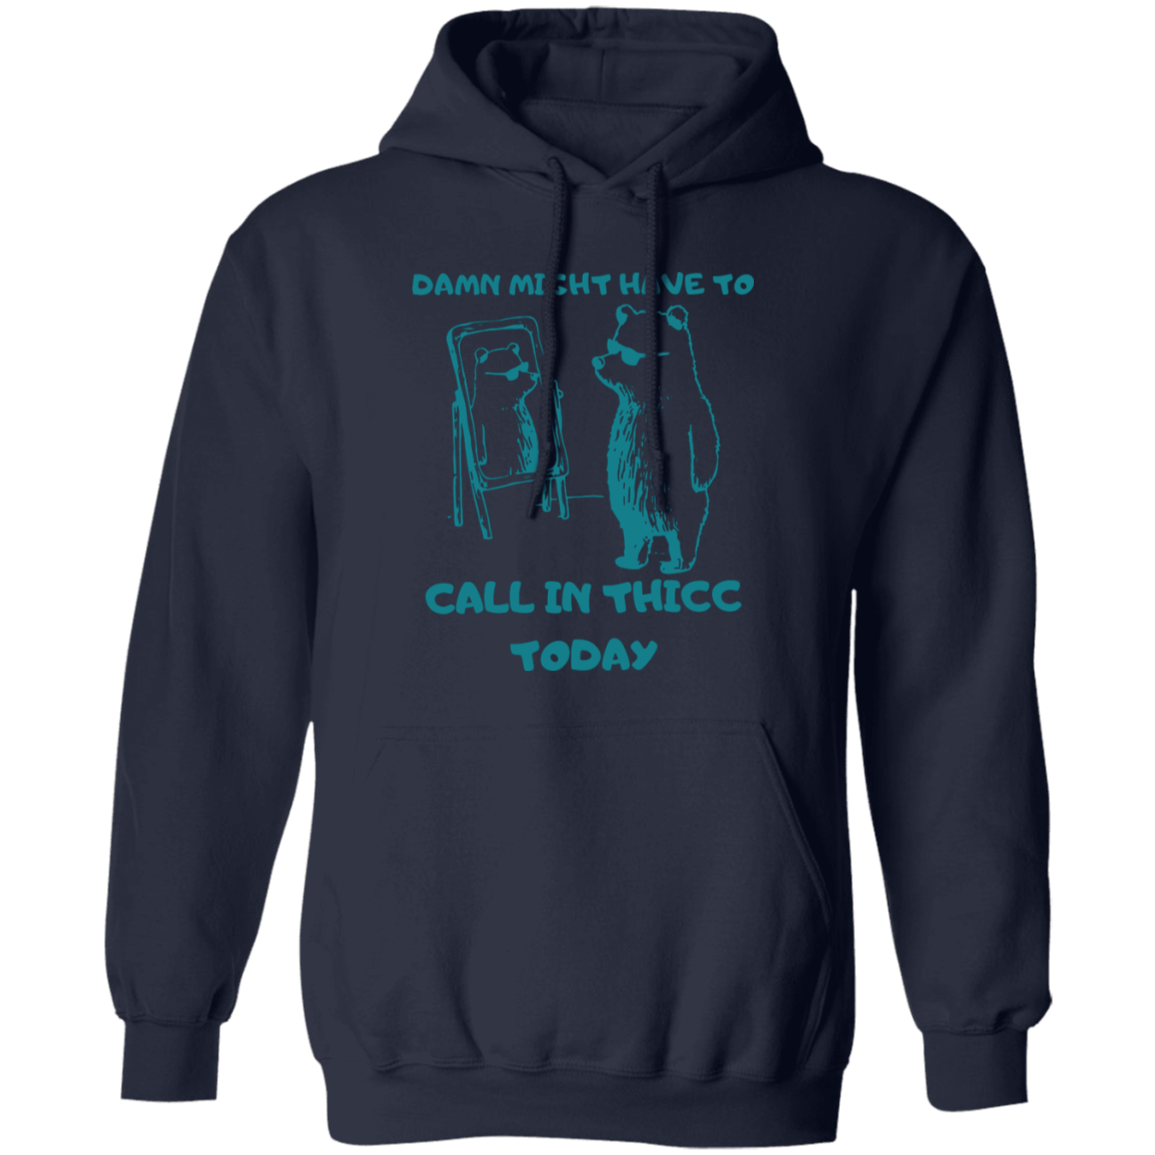 Thicc Pullover Hoodie